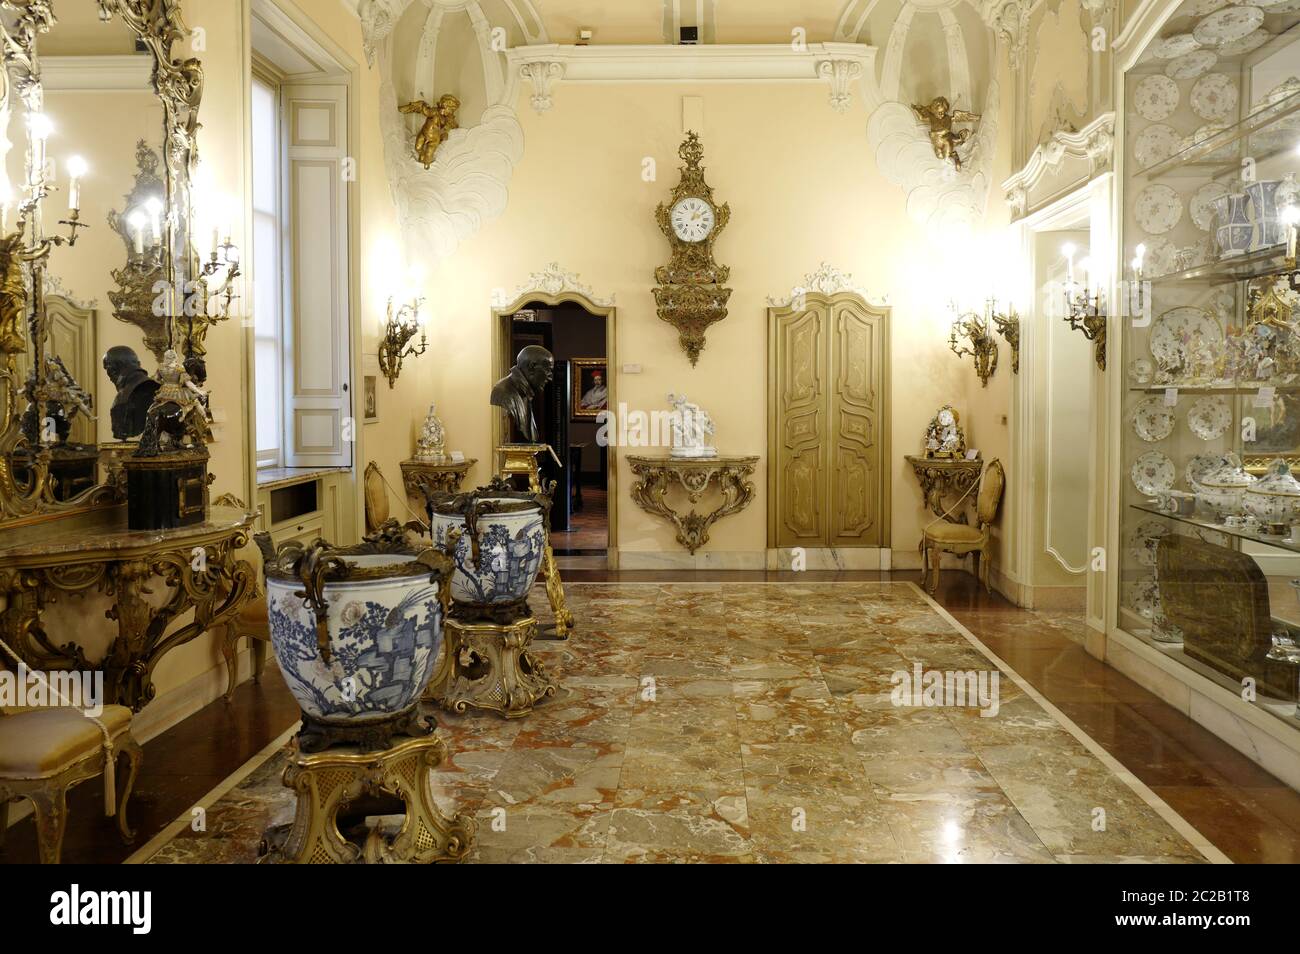 Art collection of the Poldi Pezzoli museum, an historical house building turned into a public museum, in Milan. Stock Photo